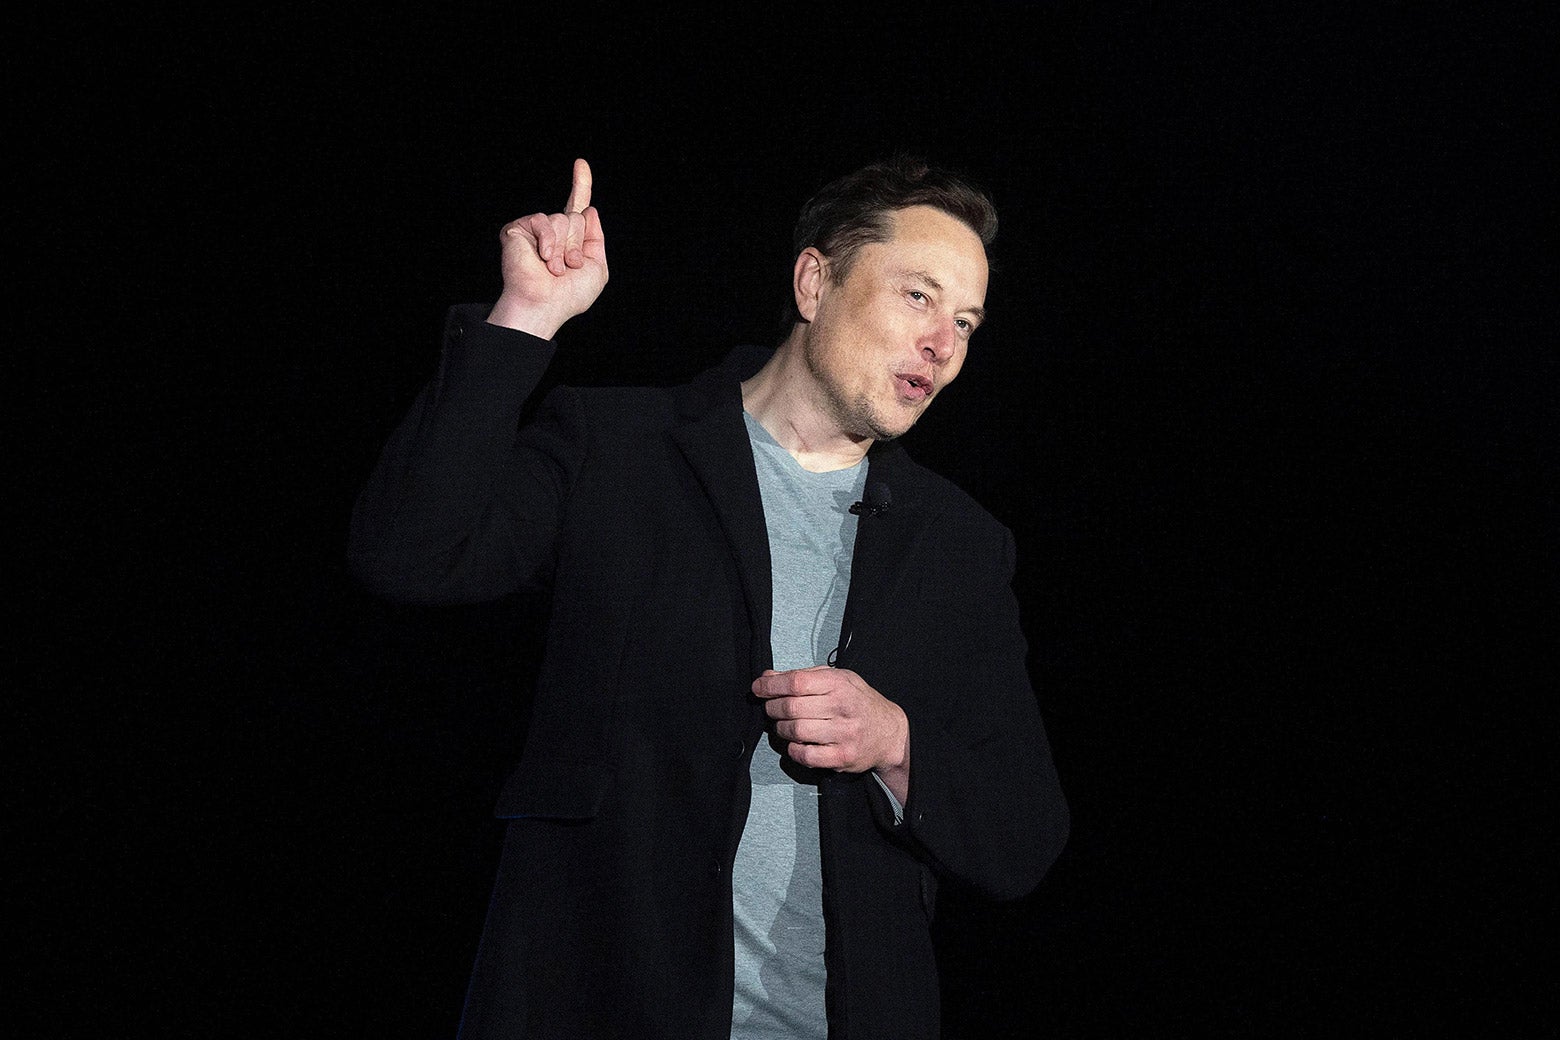 Elon Musk points up while speaking from a stage with a black background.